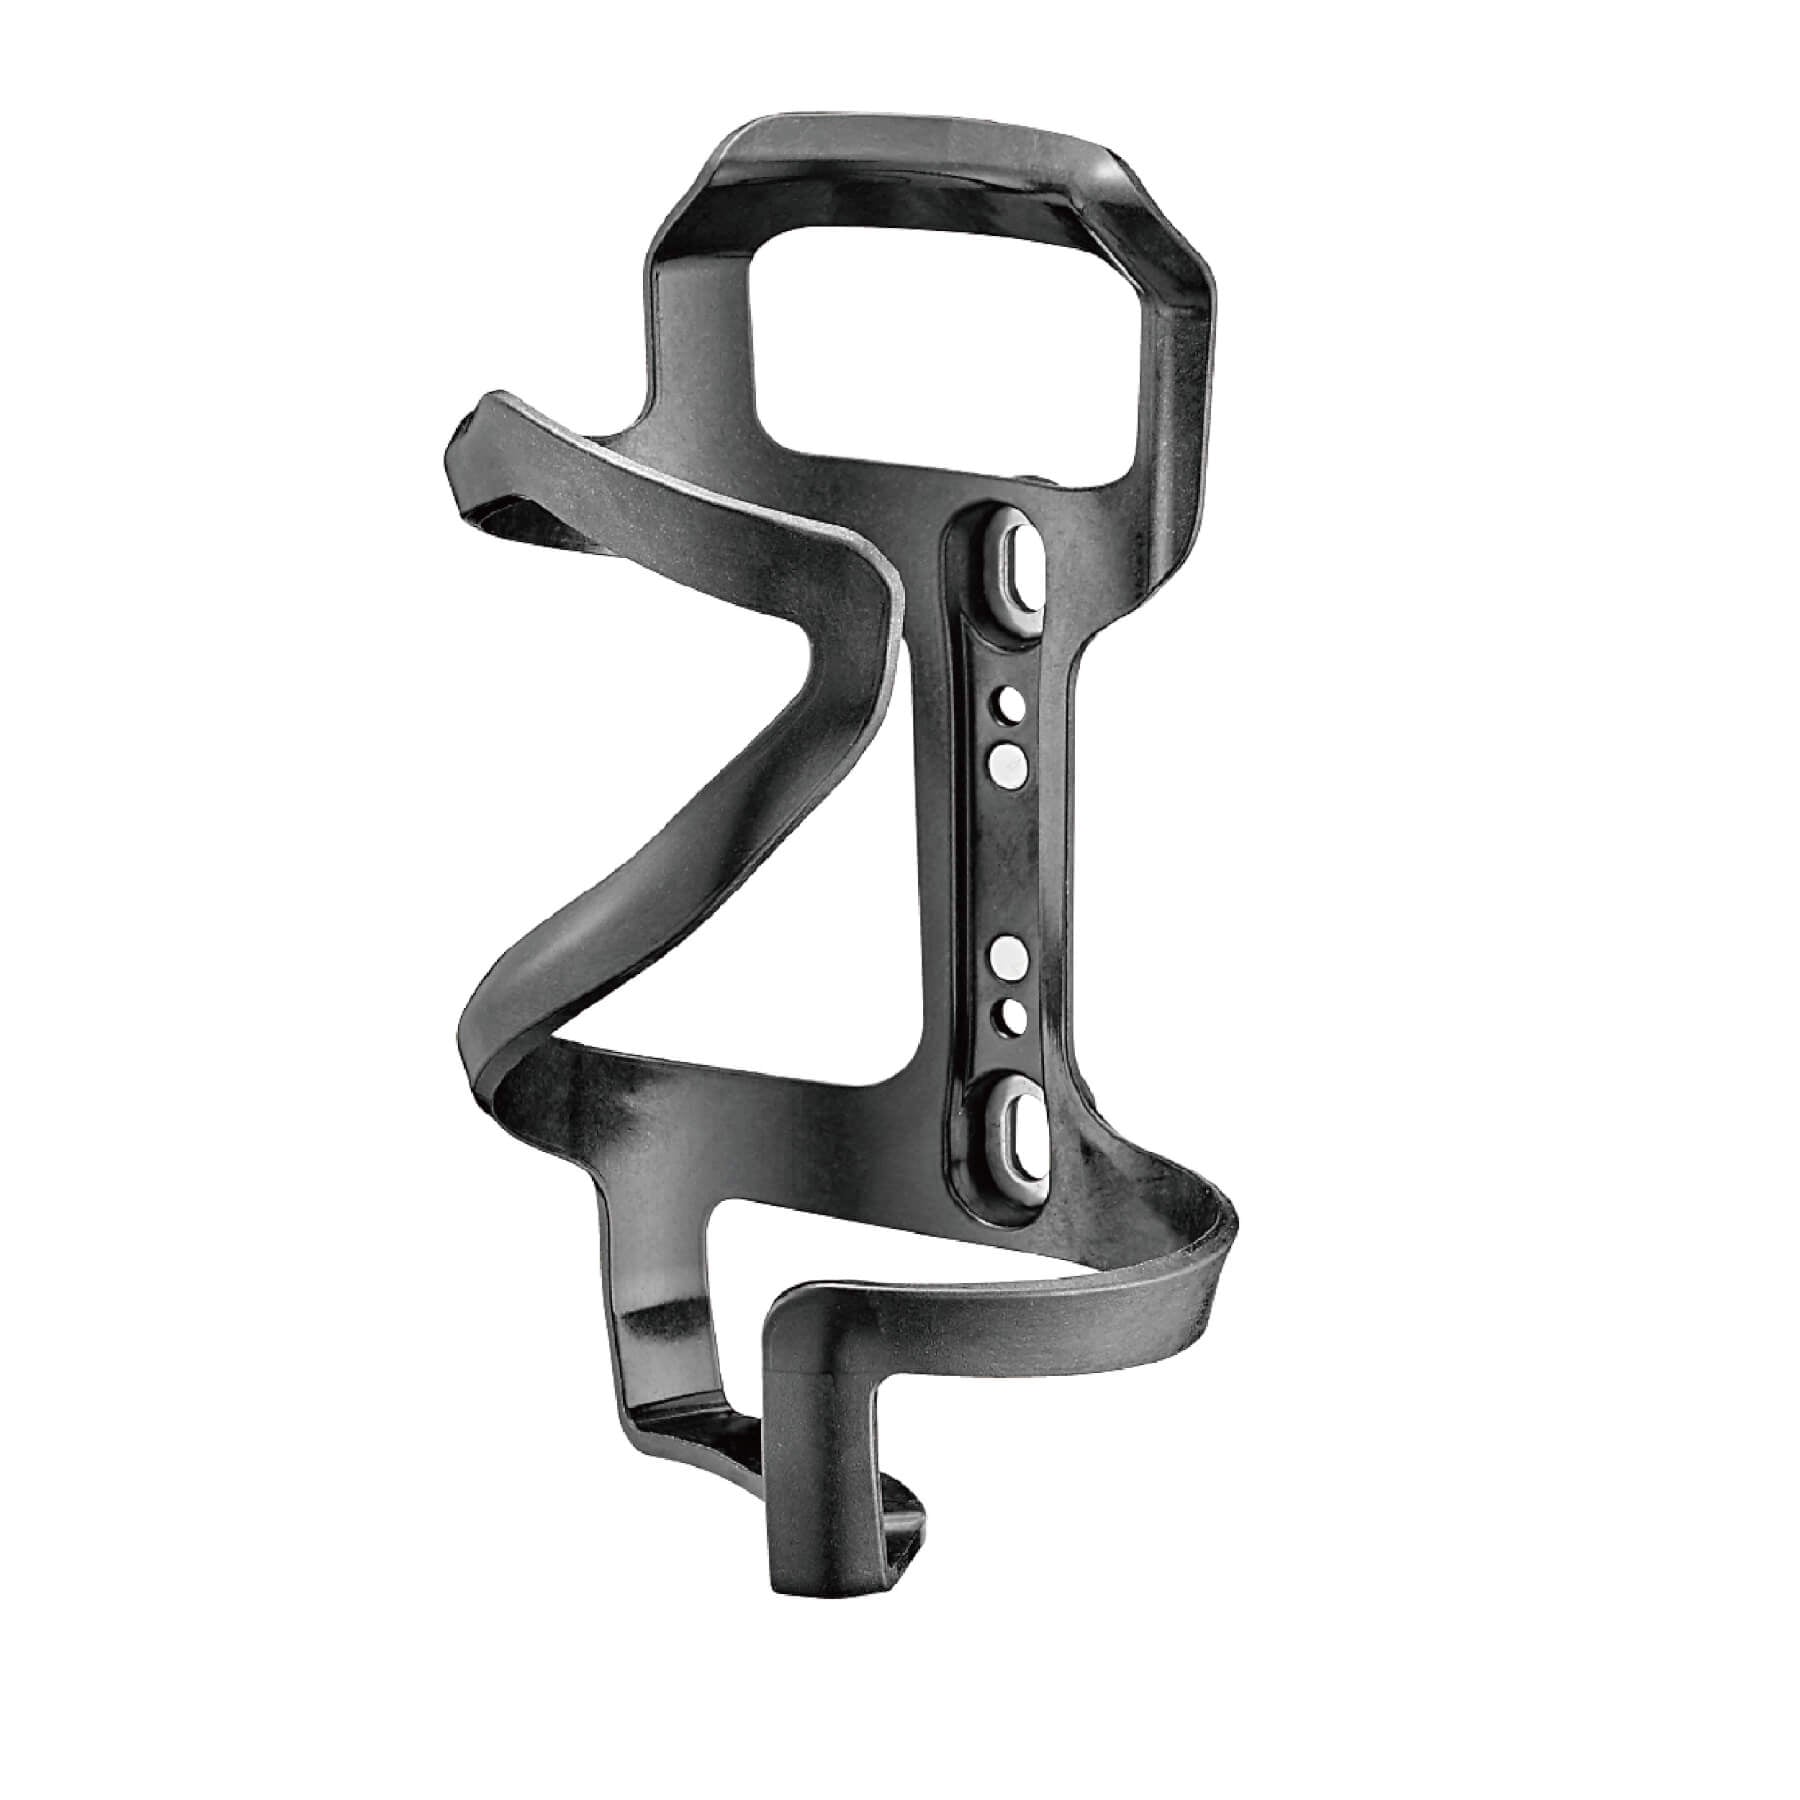 Three-quarter angle view of the McLaren side-loading e-mountain bike water bottle cage made of carbon fiber/plastic composite in matte black. 